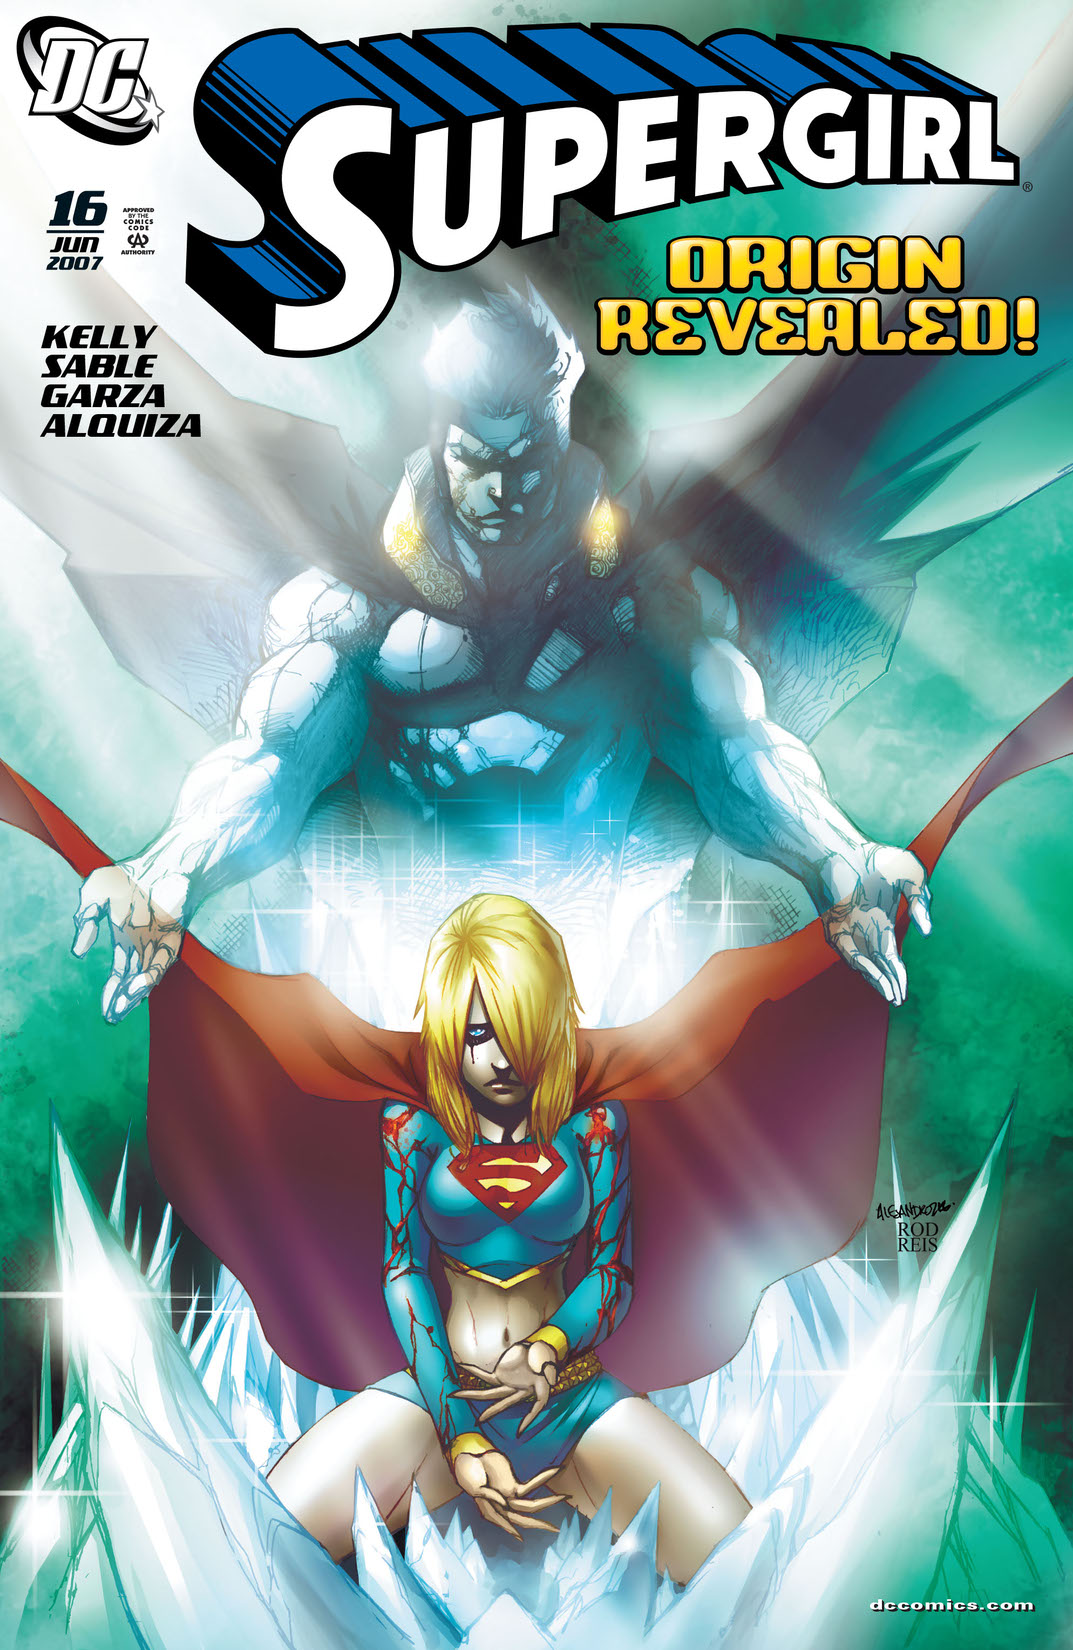 Supergirl (2005-) #16 preview images